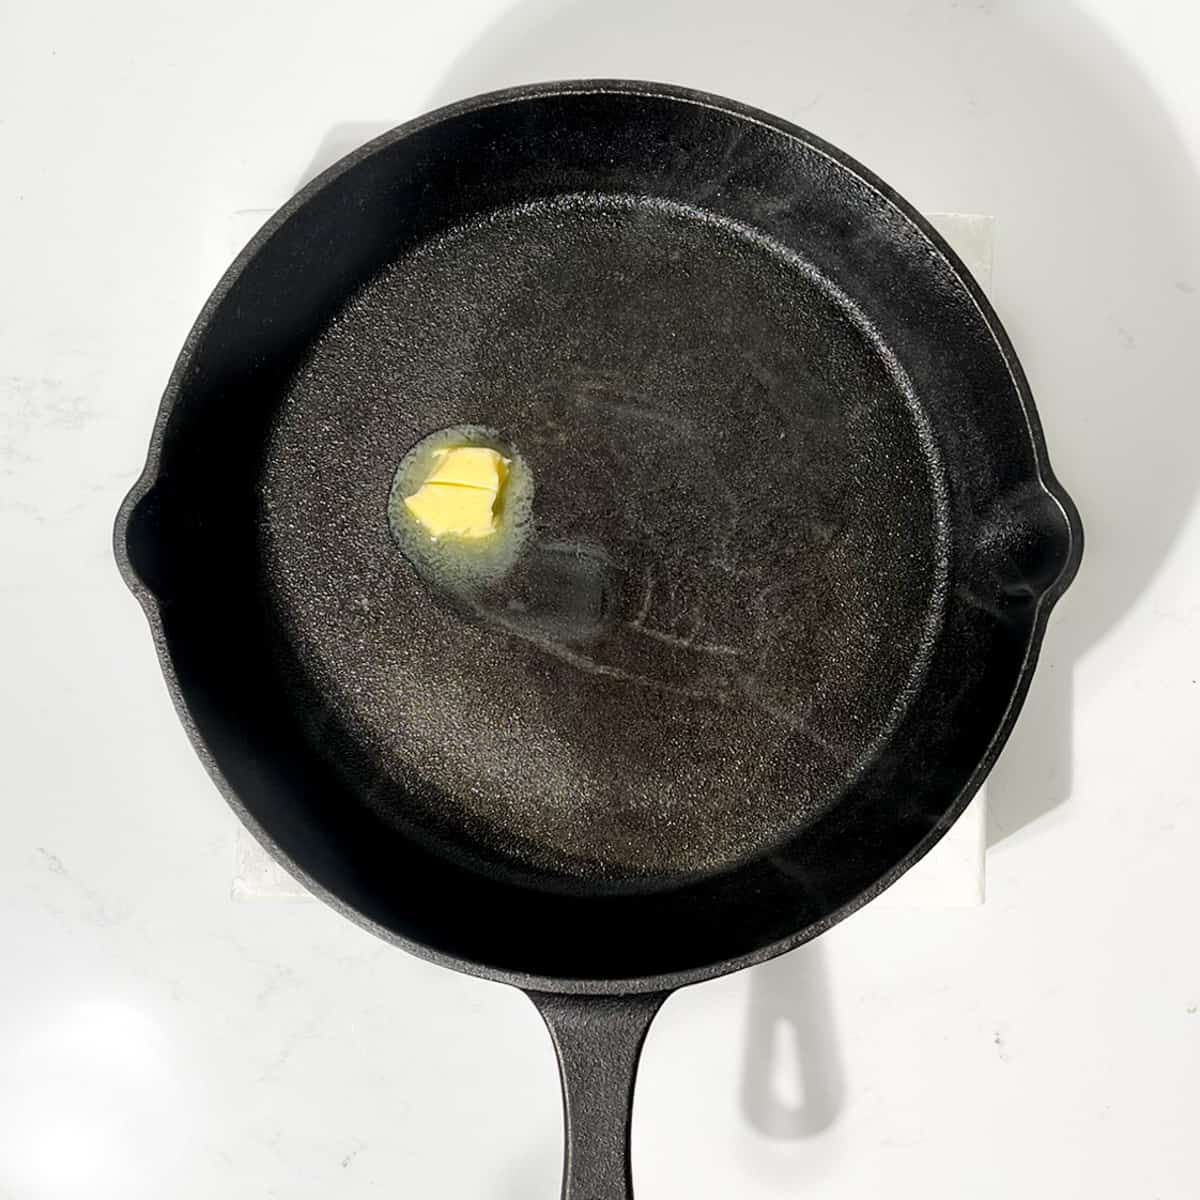 Melting a small knob of butter in a cast iron skillet.